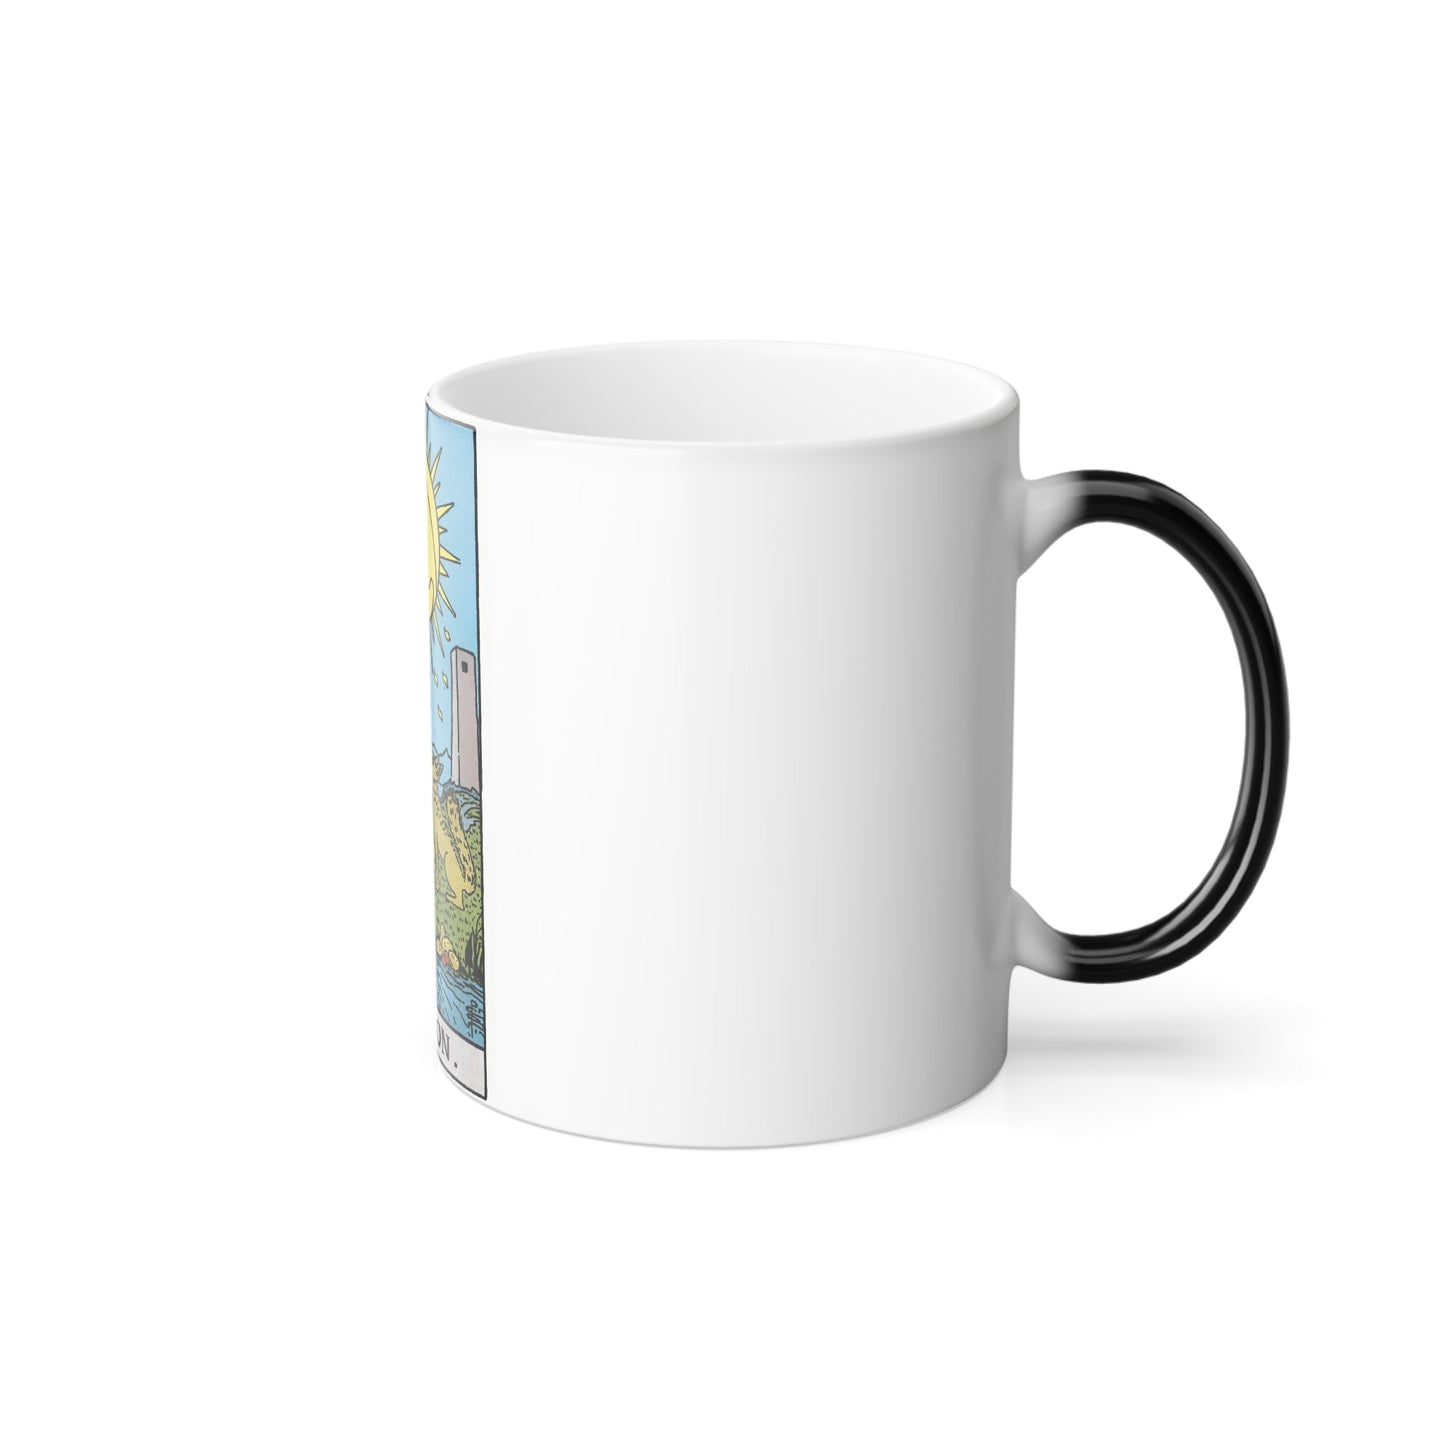 The Moon (Tarot Card) Color Changing Mug 11oz-11oz-The Sticker Space